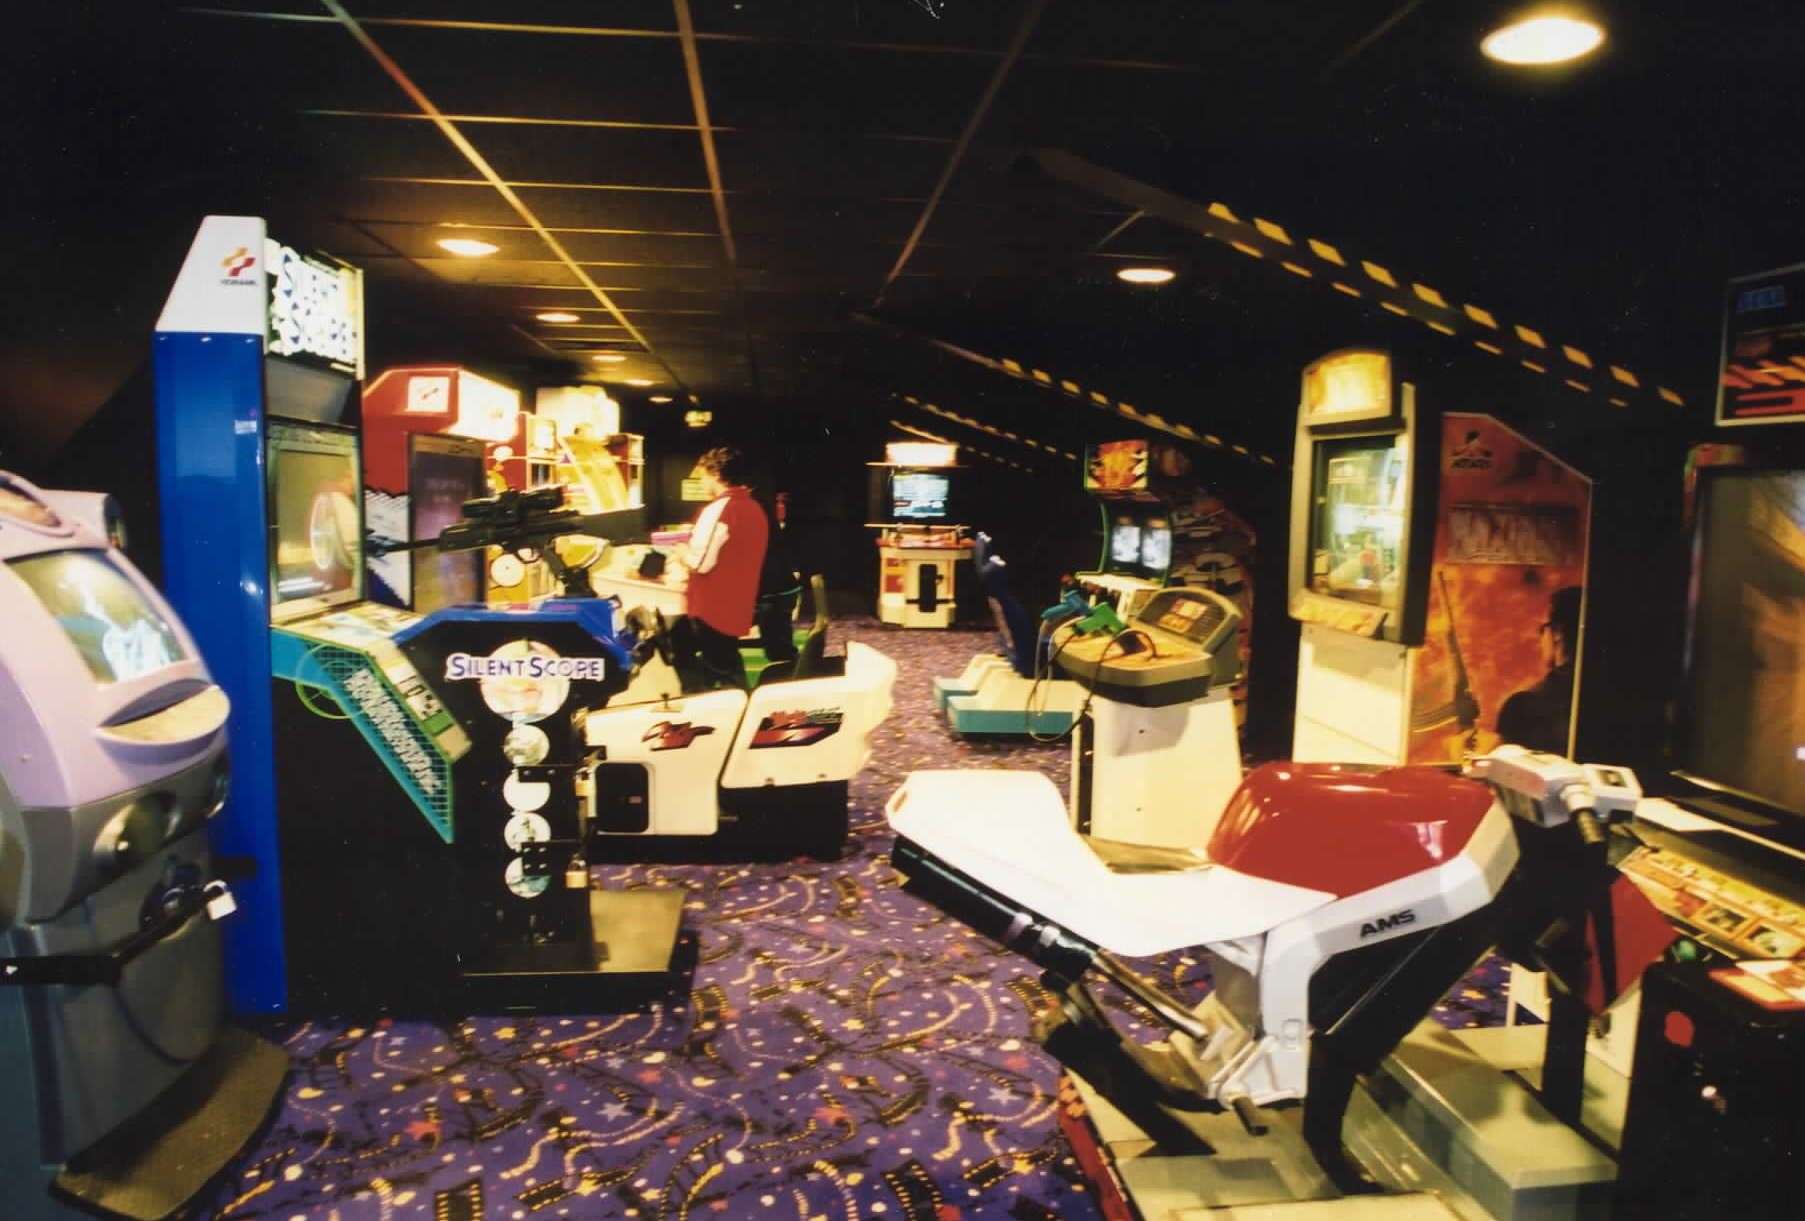 The cinema's arcade area, pictured in 2002, has been removed